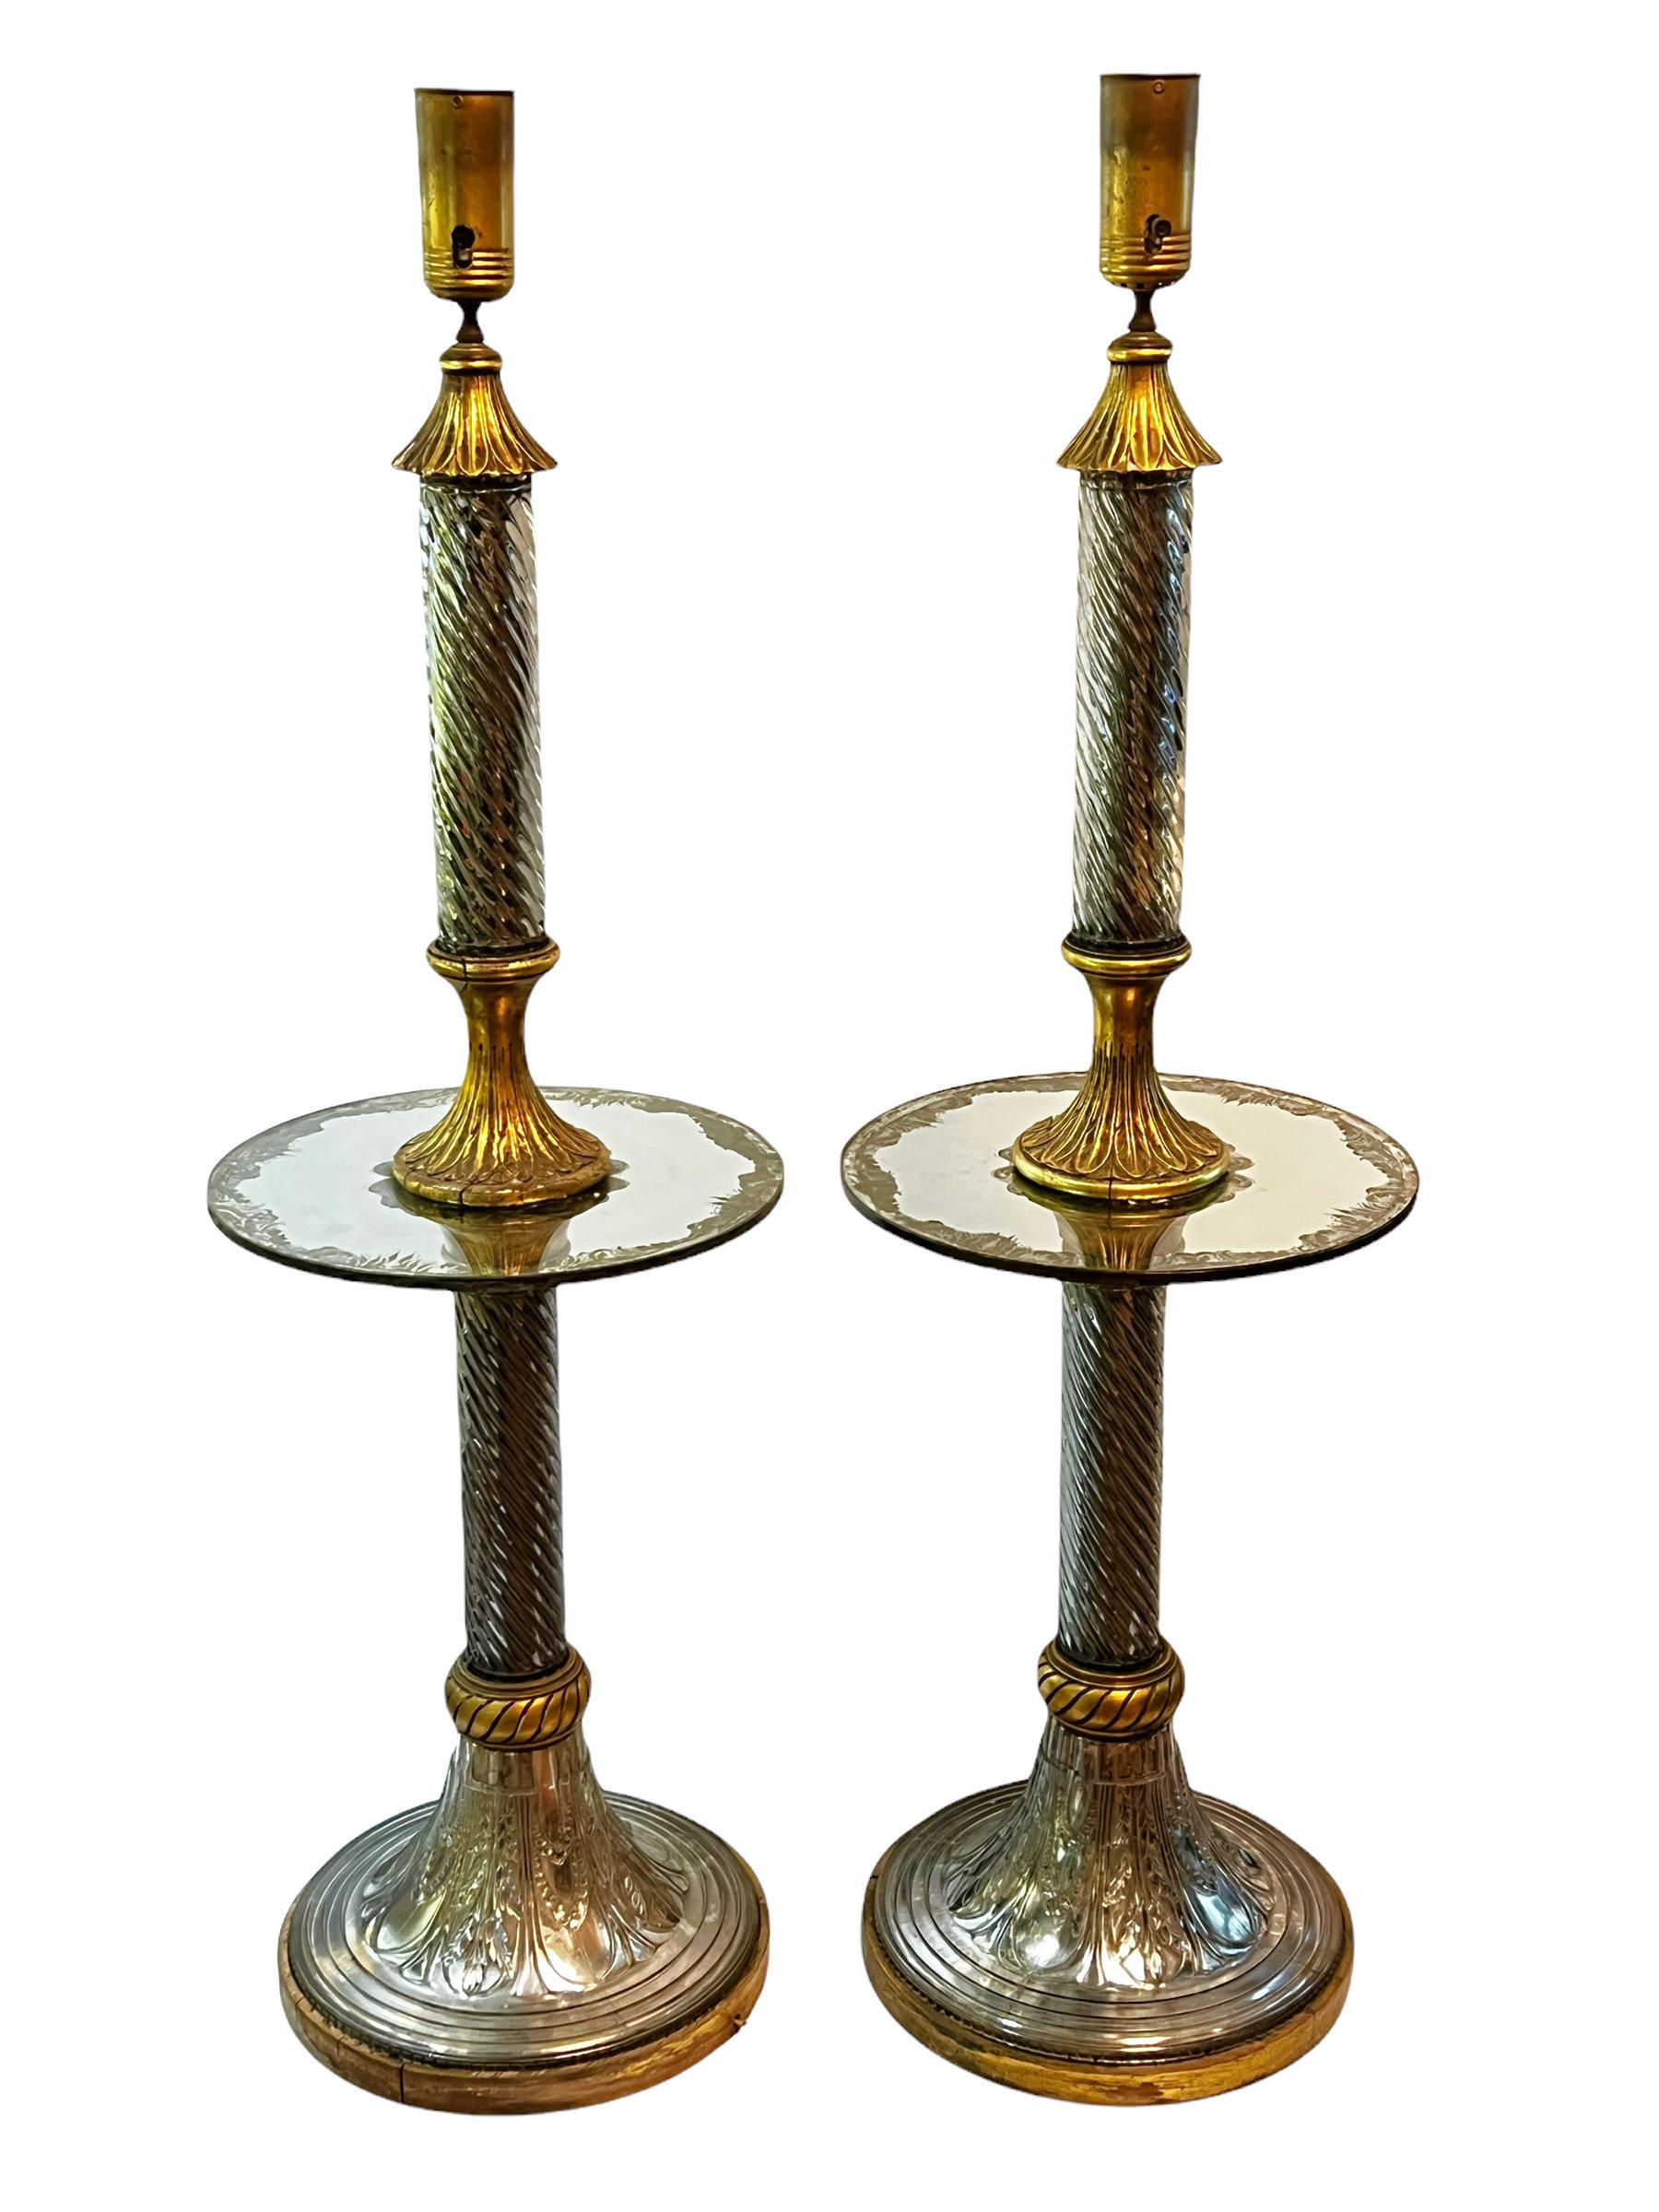 Our very rare pair of torchieres, attributed to Maison Bagues, feature standards of blown glass and carved giltwood, with round gilded glass table tops and reverse silvered glass pedestals, and their original sockets with ceramic diffusers.

In